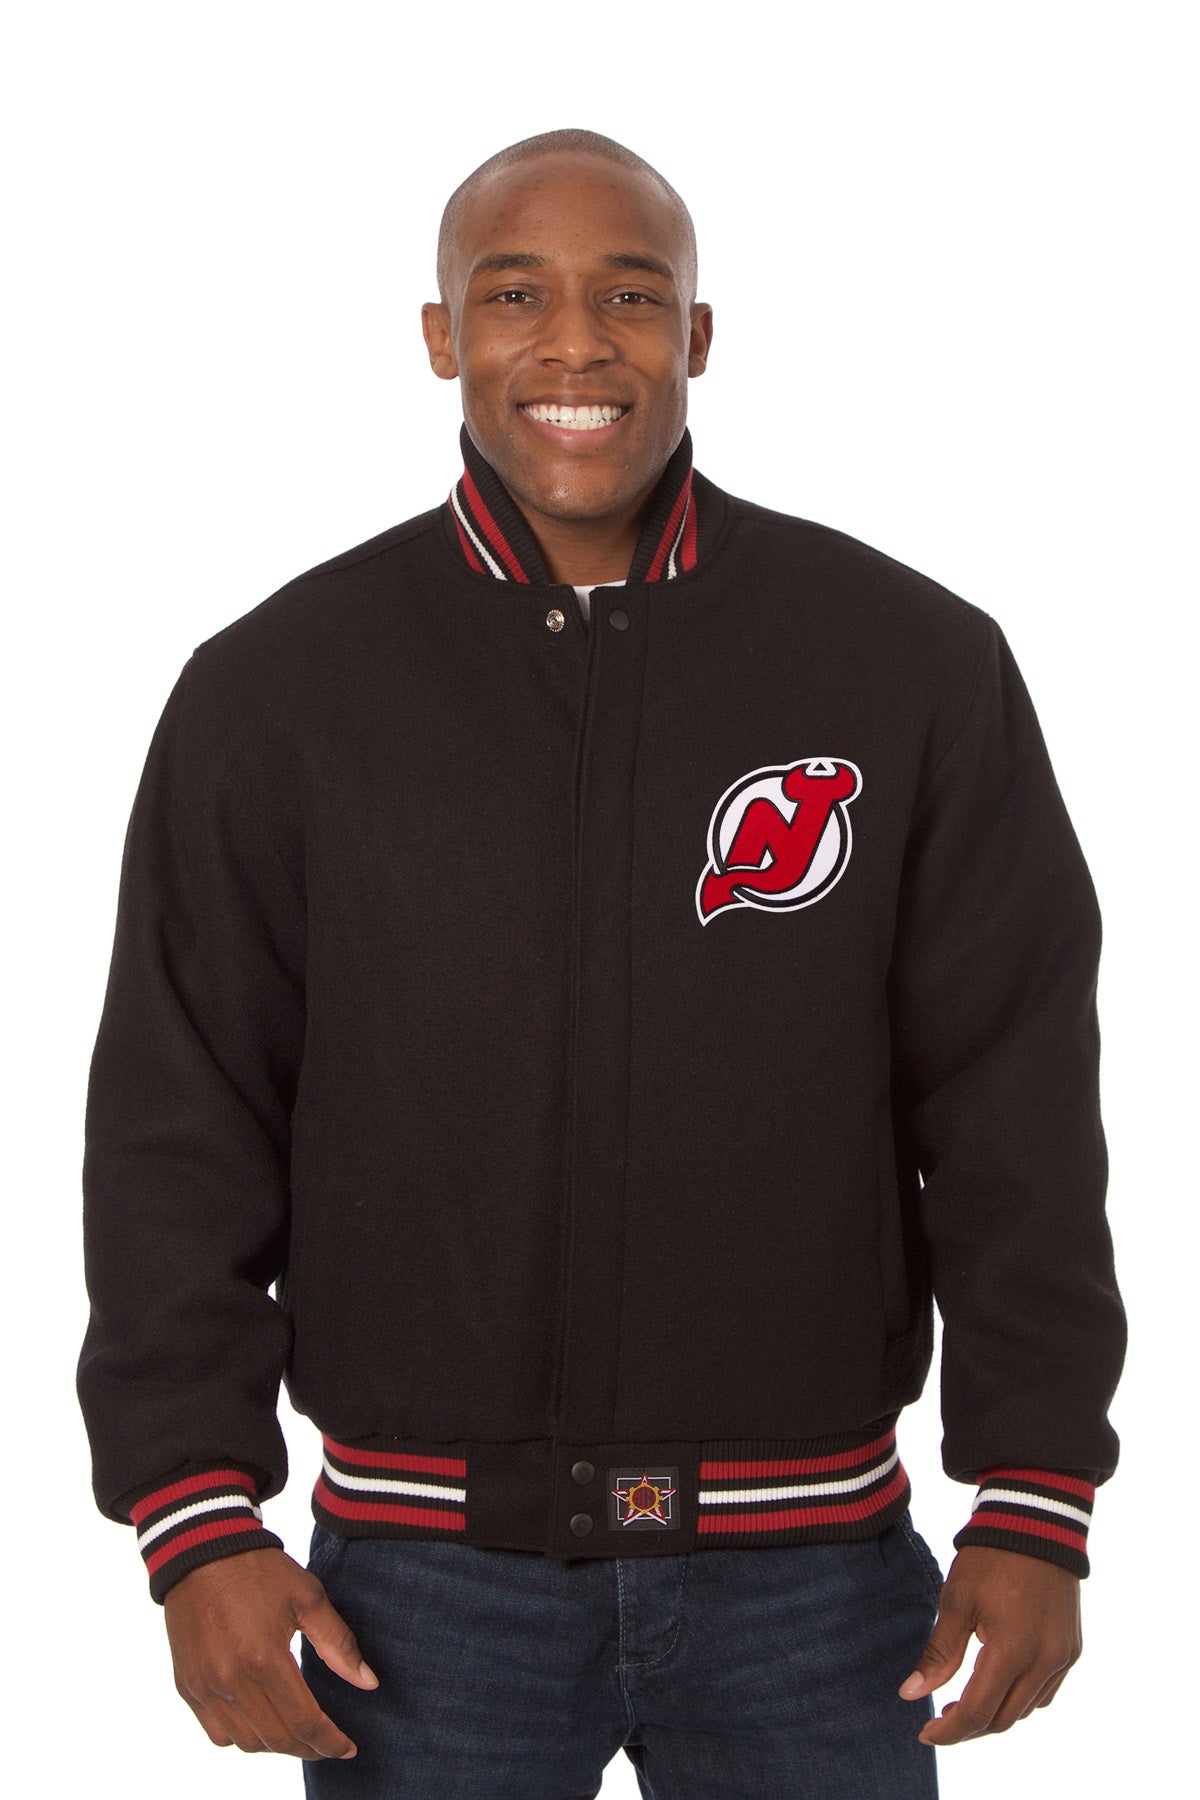 New Jersey Devils Embroidered Wool Jacket